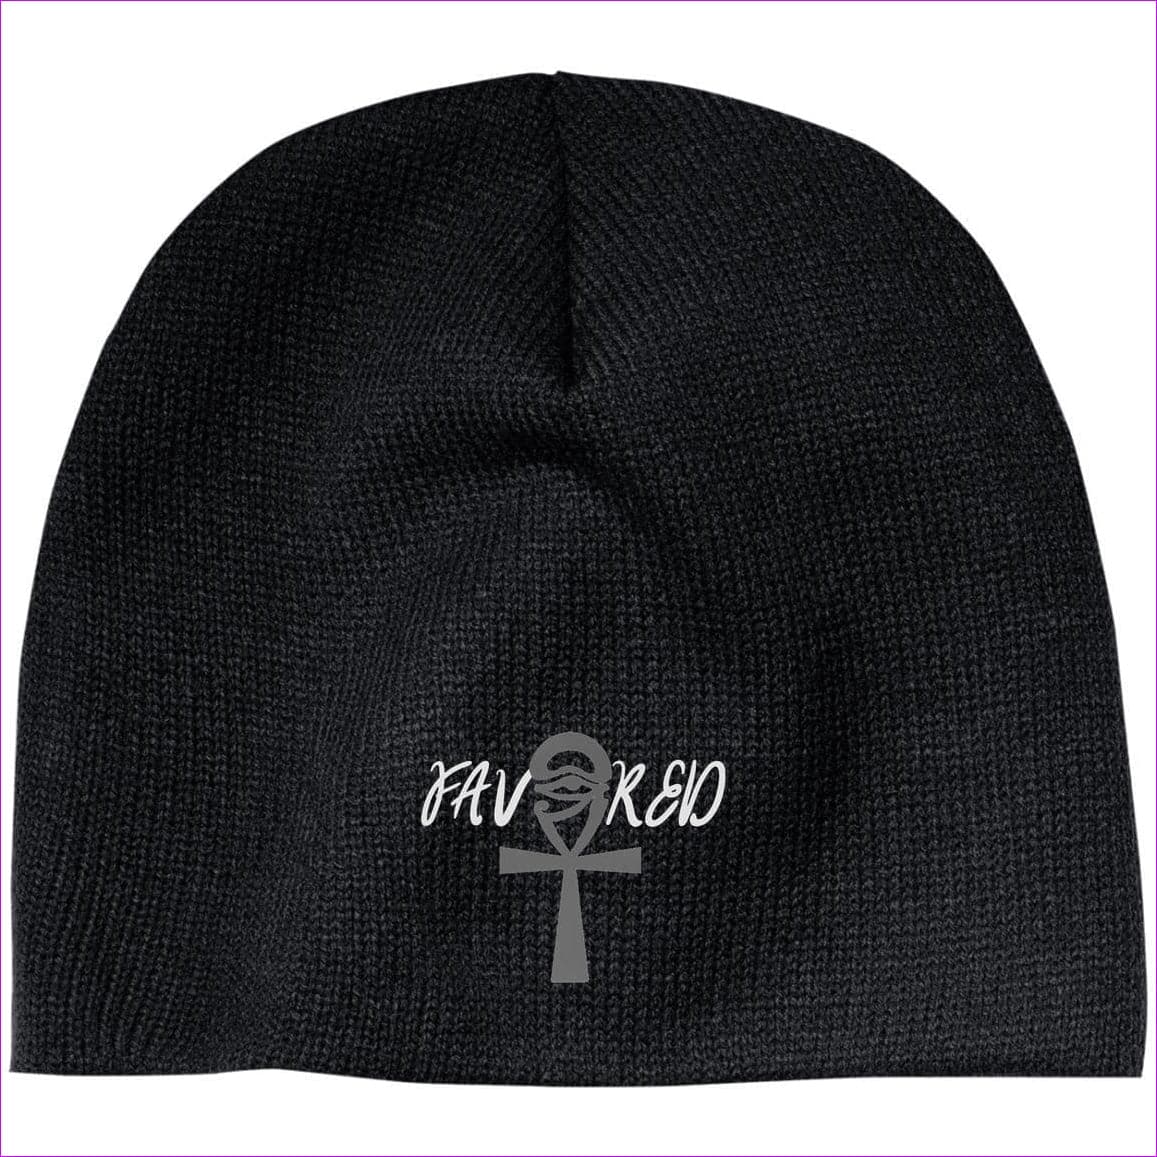 CP91 100% Acrylic Beanie Black One Size - Favored Embroidered Cap, Knit Cap, Beanie - Beanie at TFC&H Co.